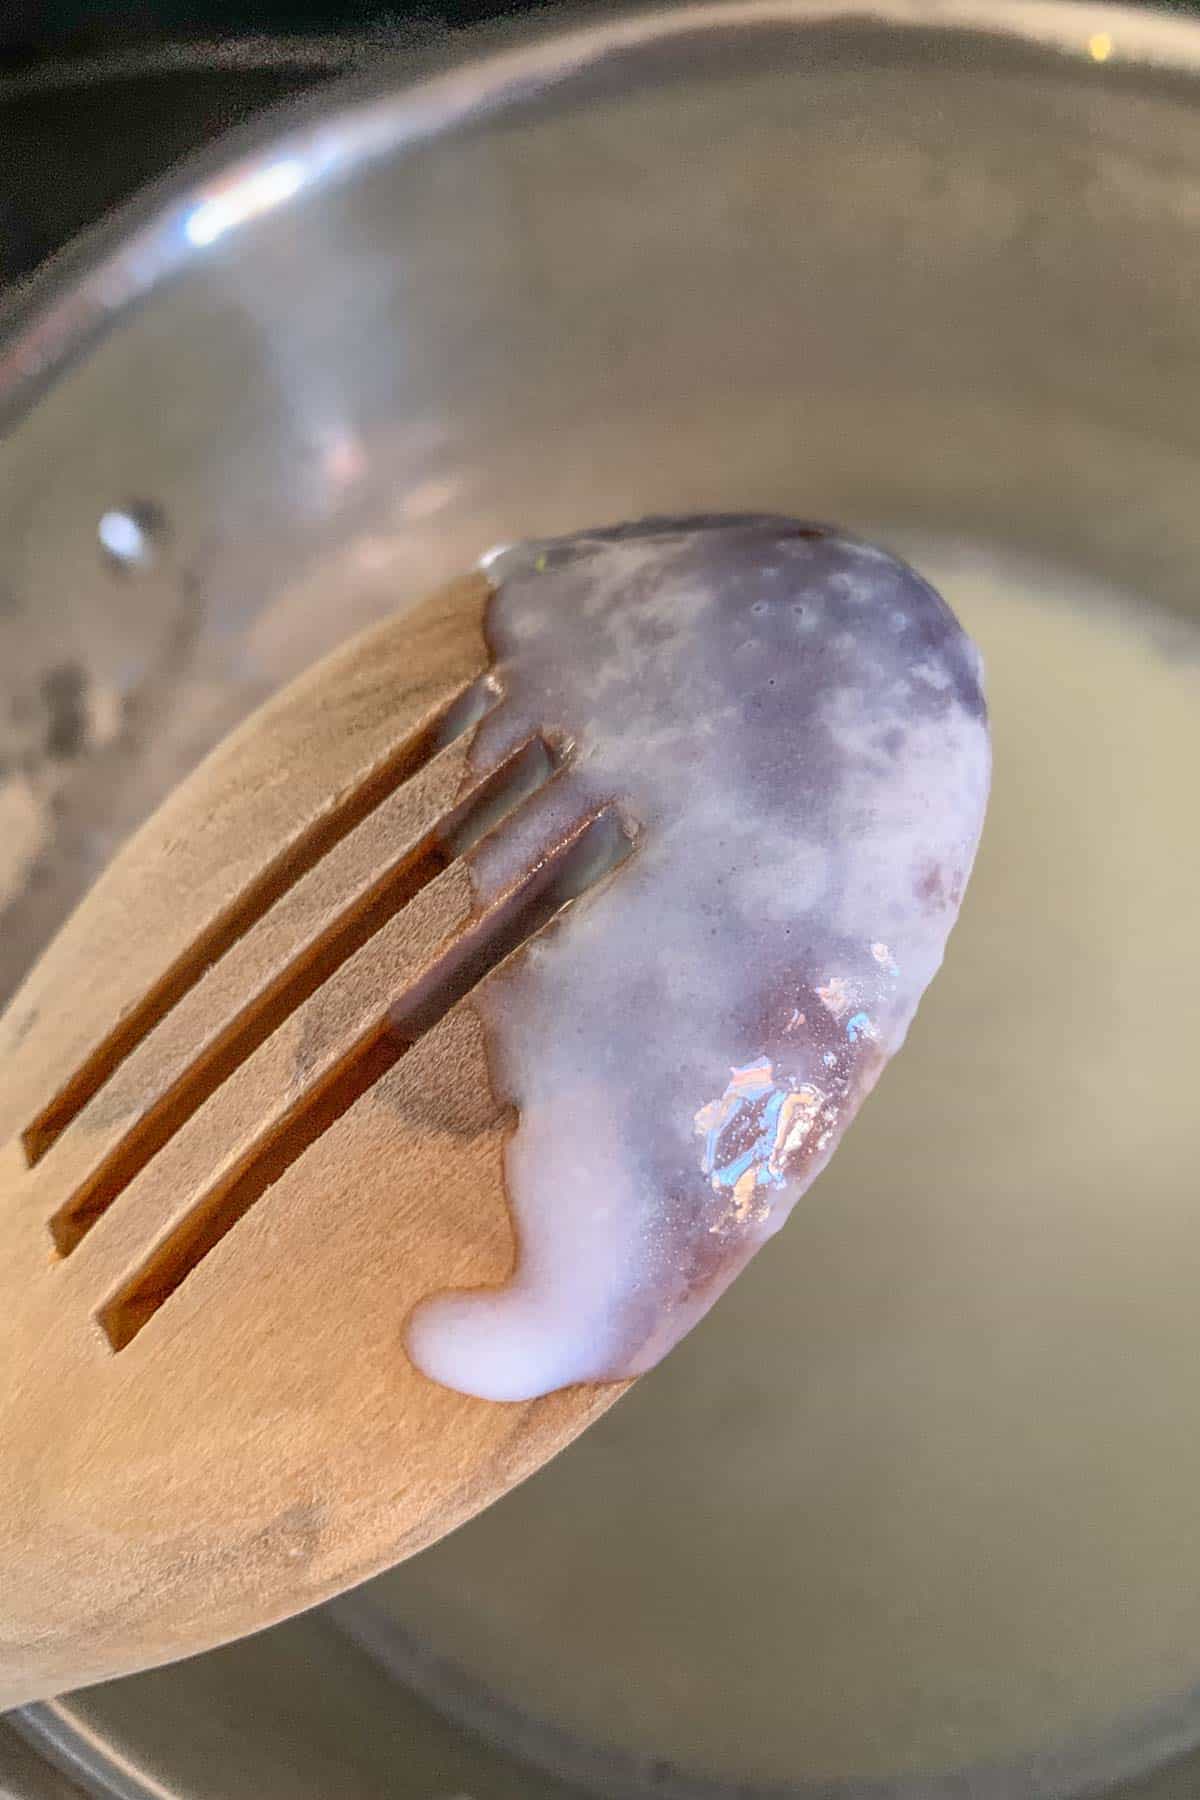 Spoon showing sauce lightly coating it.